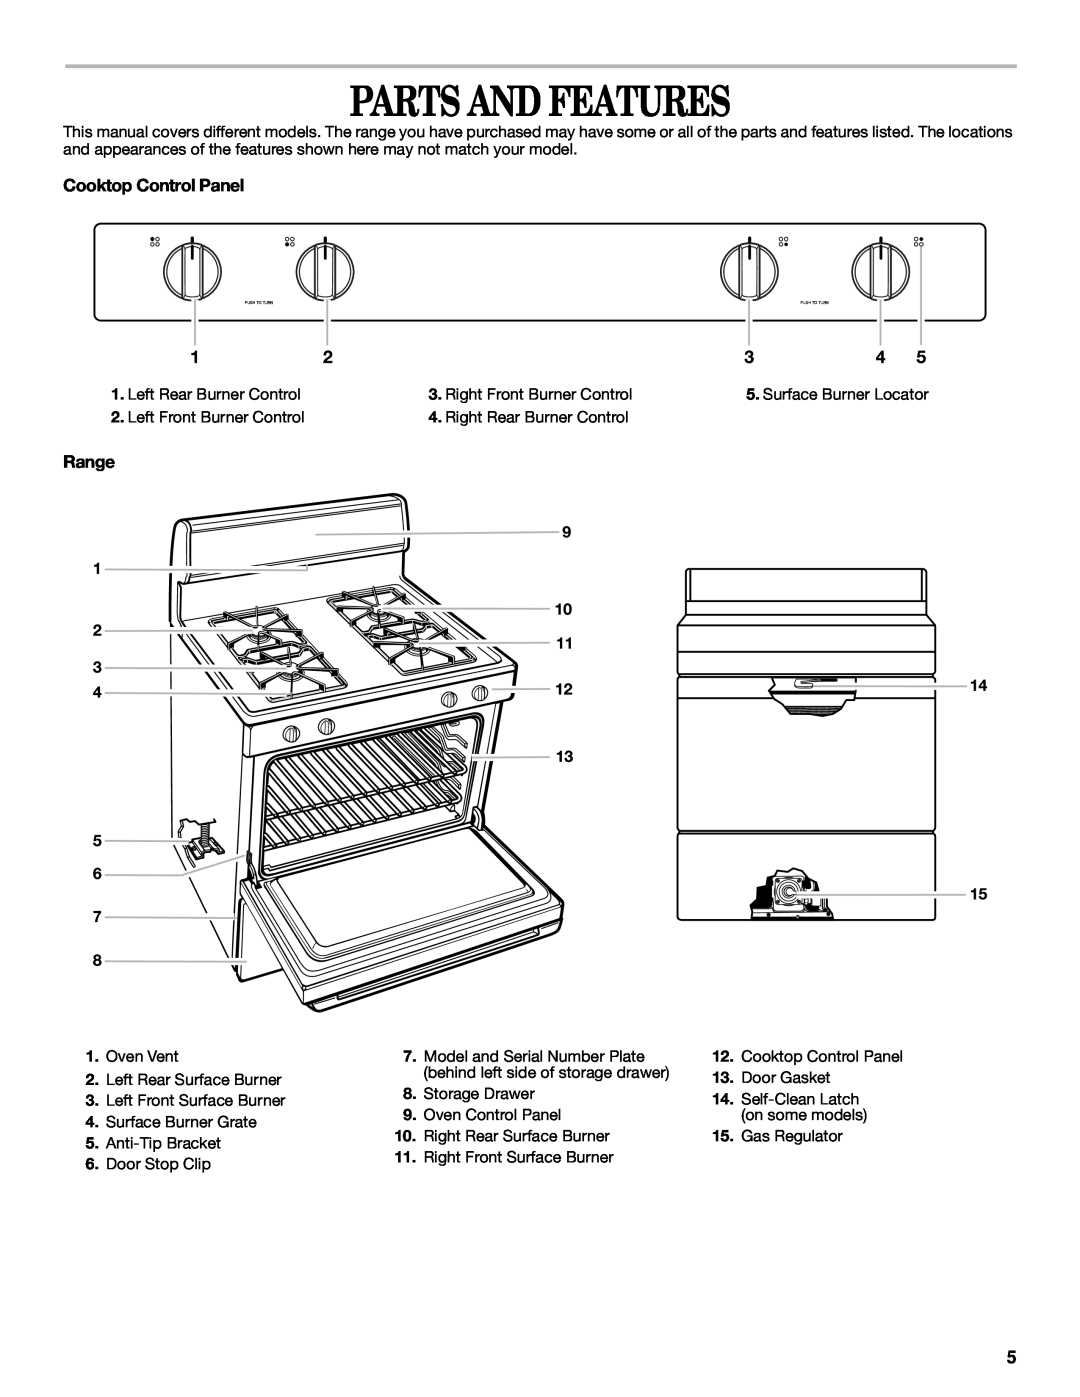 Whirlpool SF357BEH Parts And Features, Cooktop Control Panel, Range, Left Rear Burner Control, Right Front Burner Control 